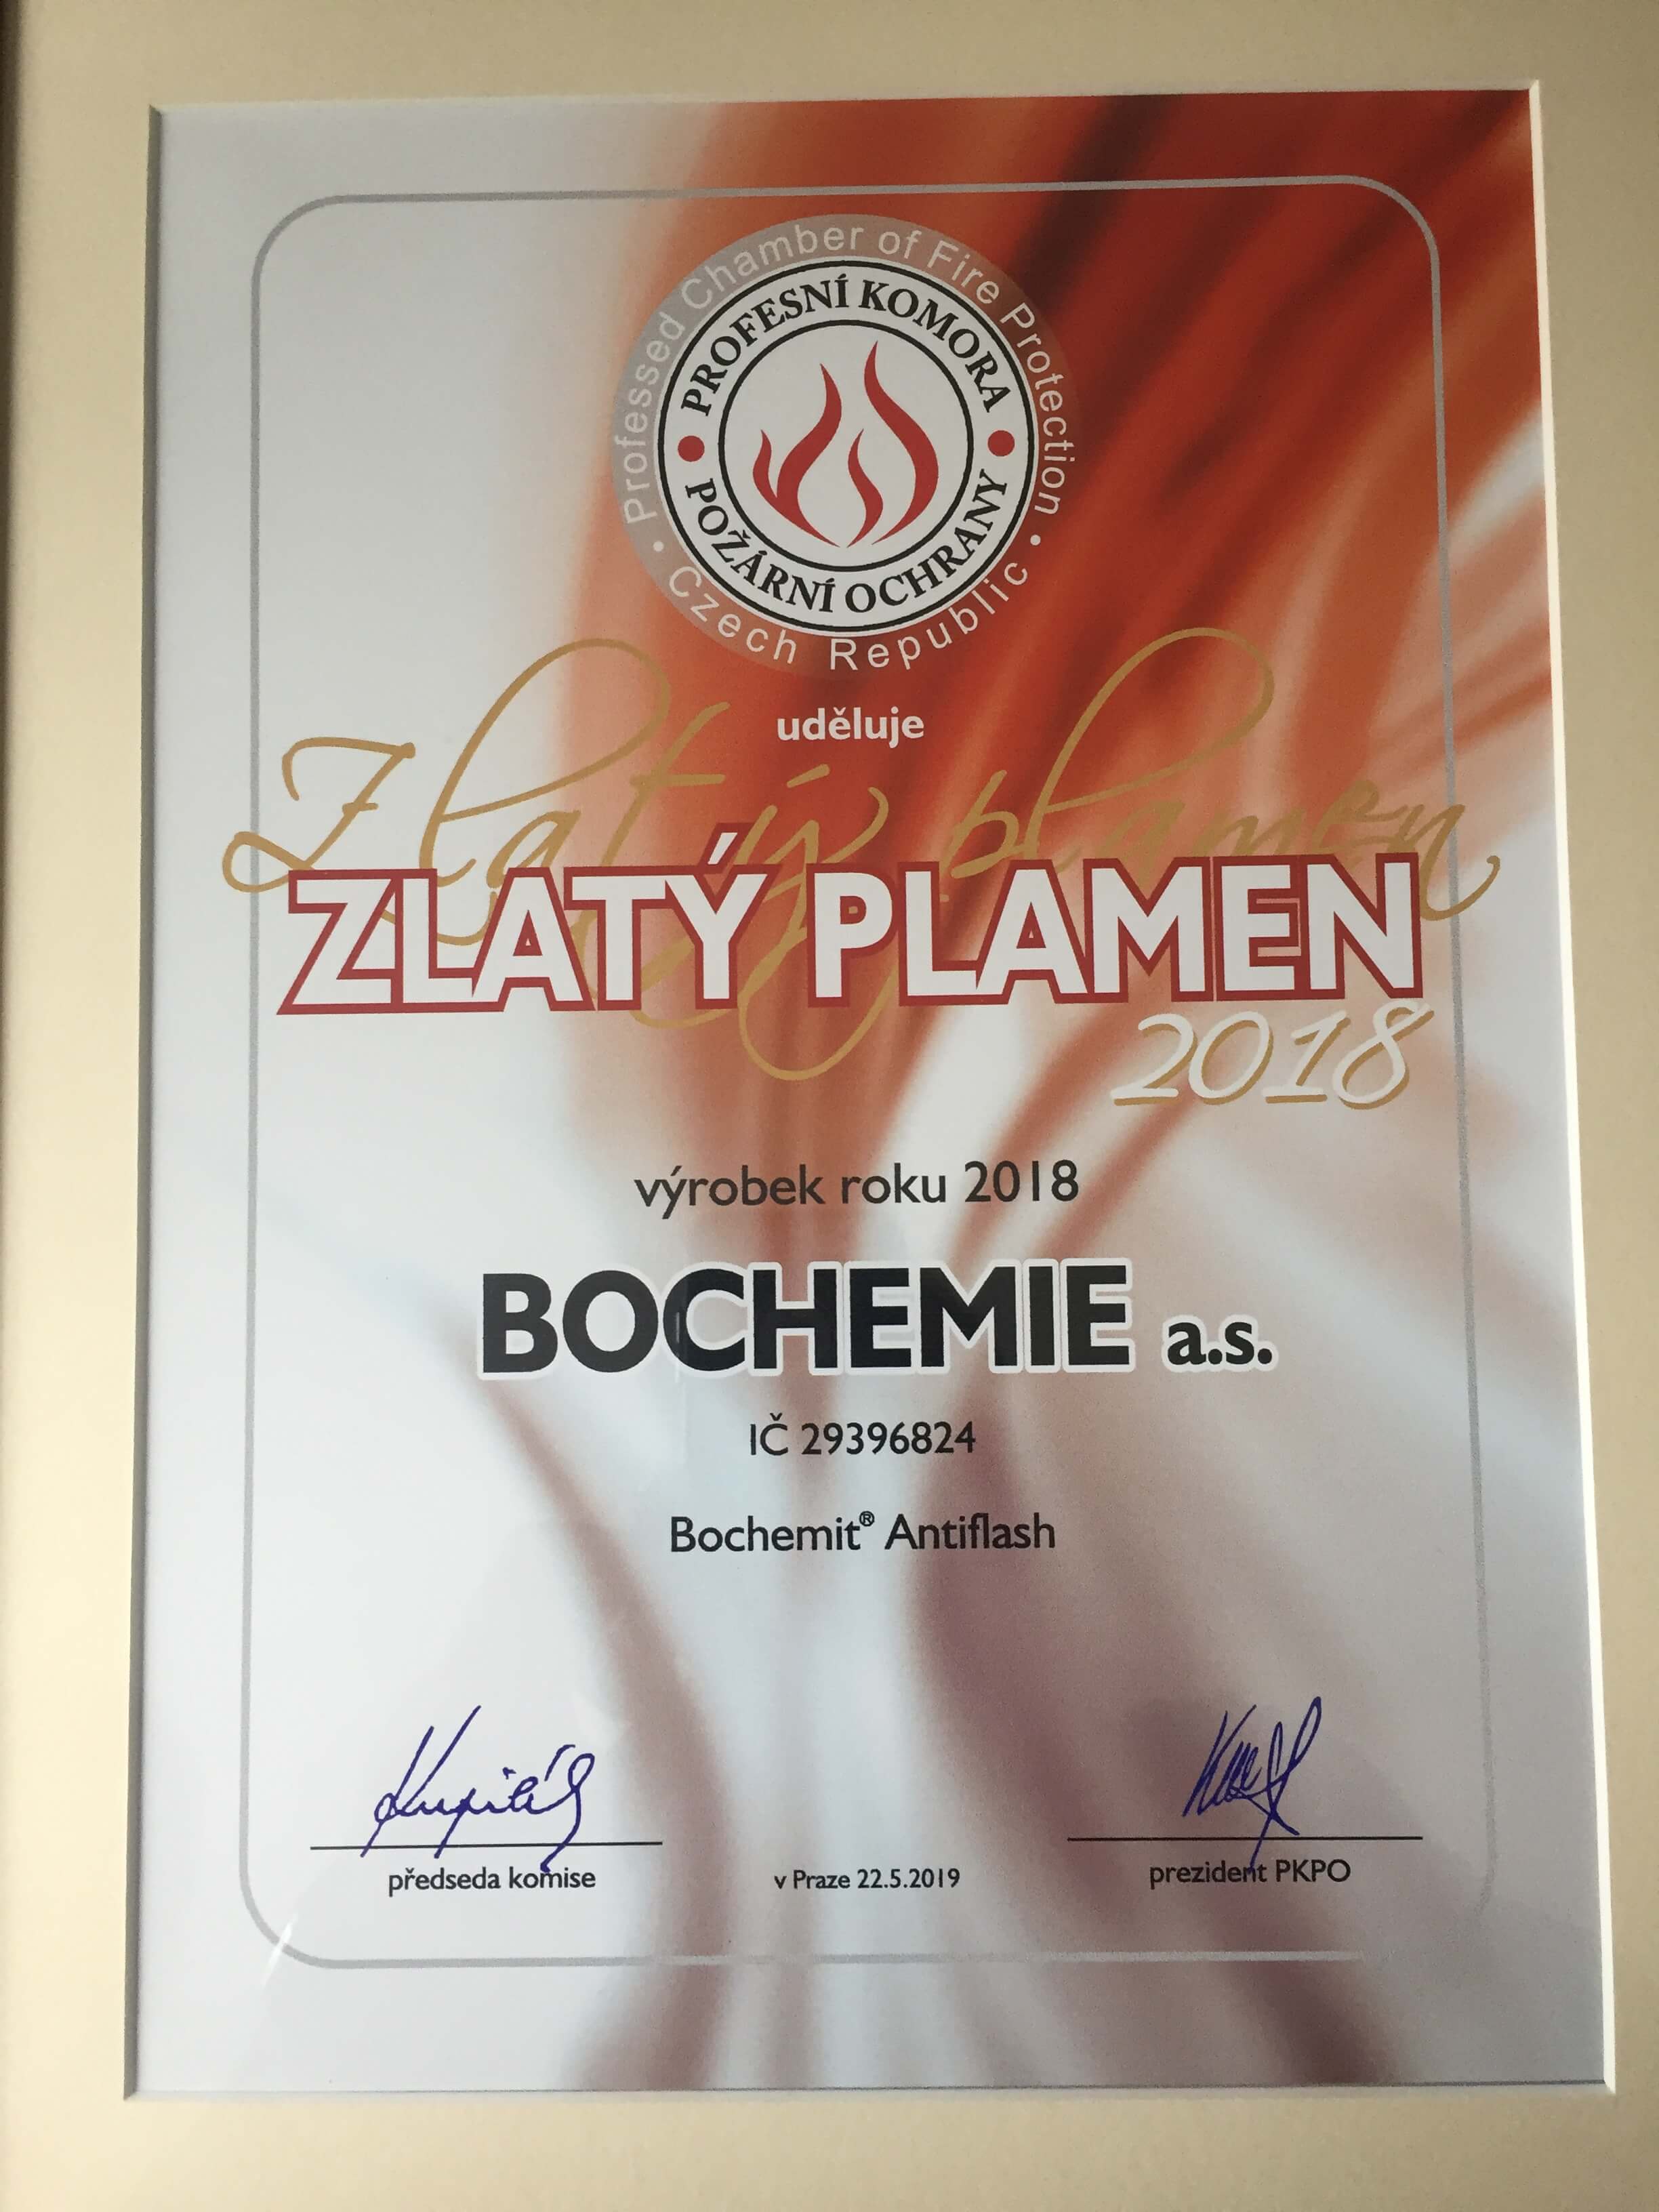 BOCHEMIT Antiflash picks up award from the Czech Professional Chamber of Fire Protection